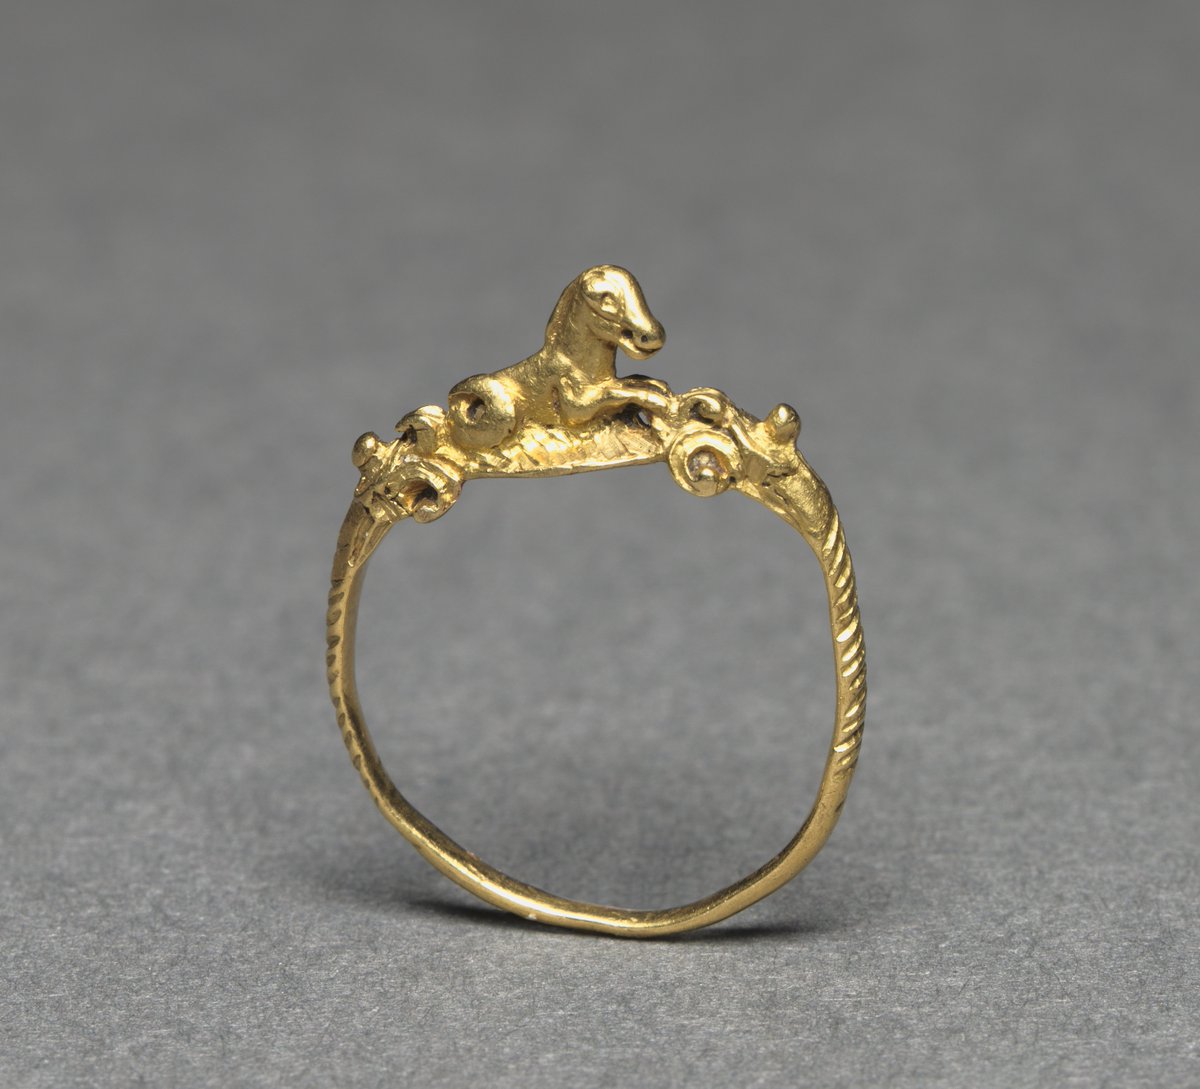 An adorable gold Roman ring featuring a hippocamp riding the waves. Dated to c. 1st - 2nd century CE. 🏛️@ClevelandArt #Roman #Art #History #Classics